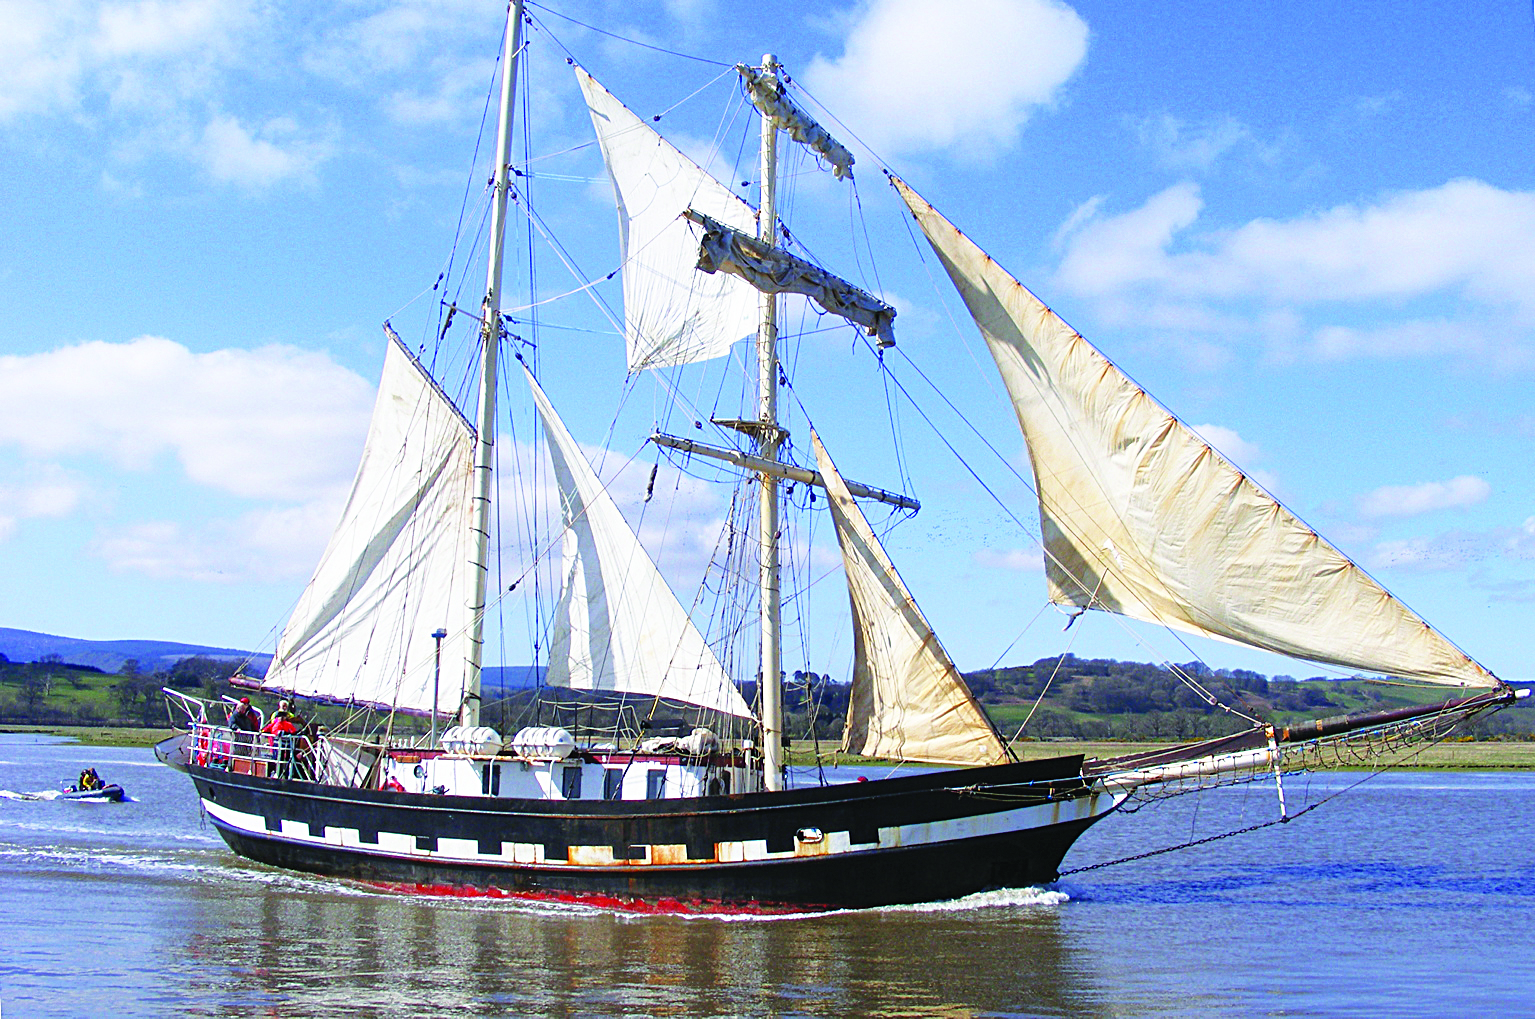 Film role for Nith tall ship